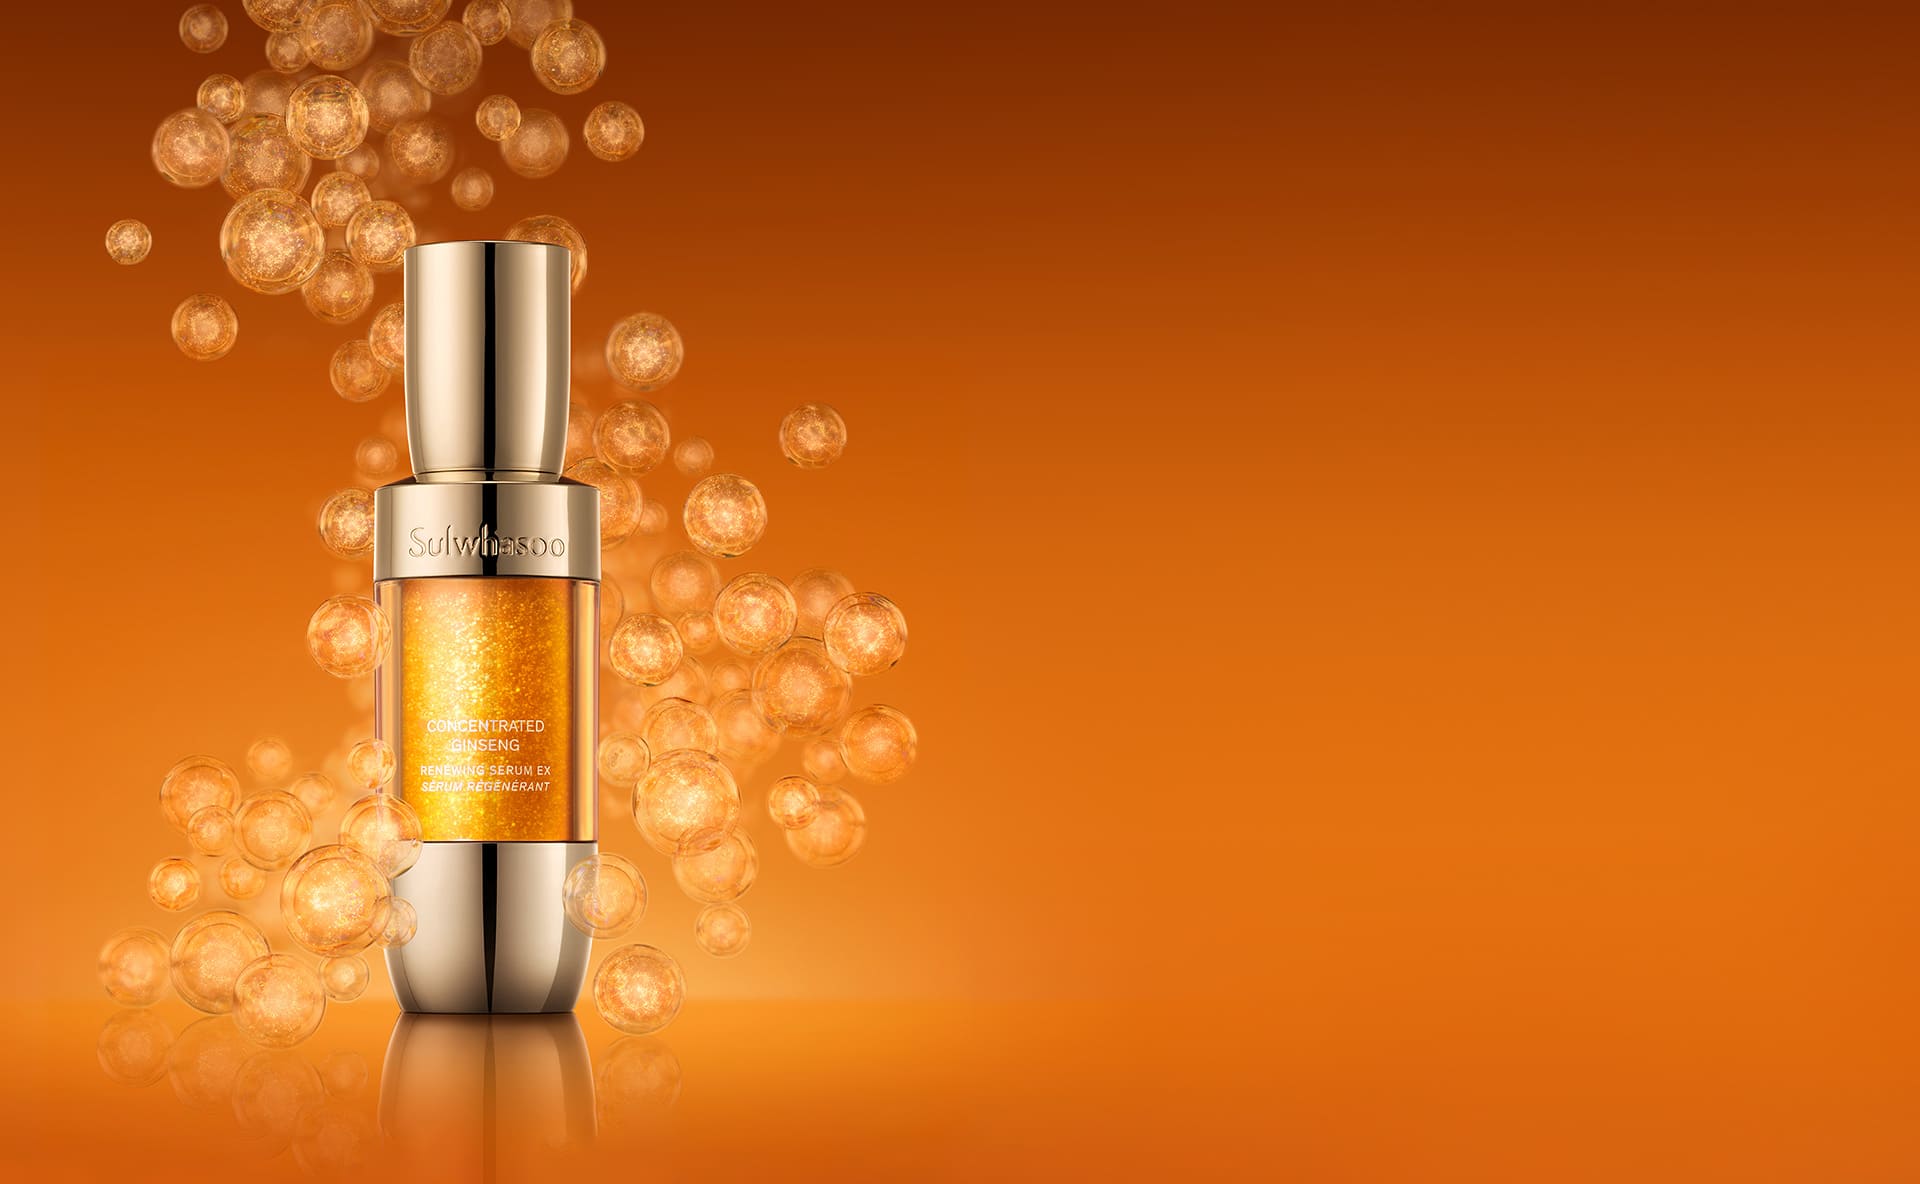 Concentrated Ginseng Renewing Serum EX